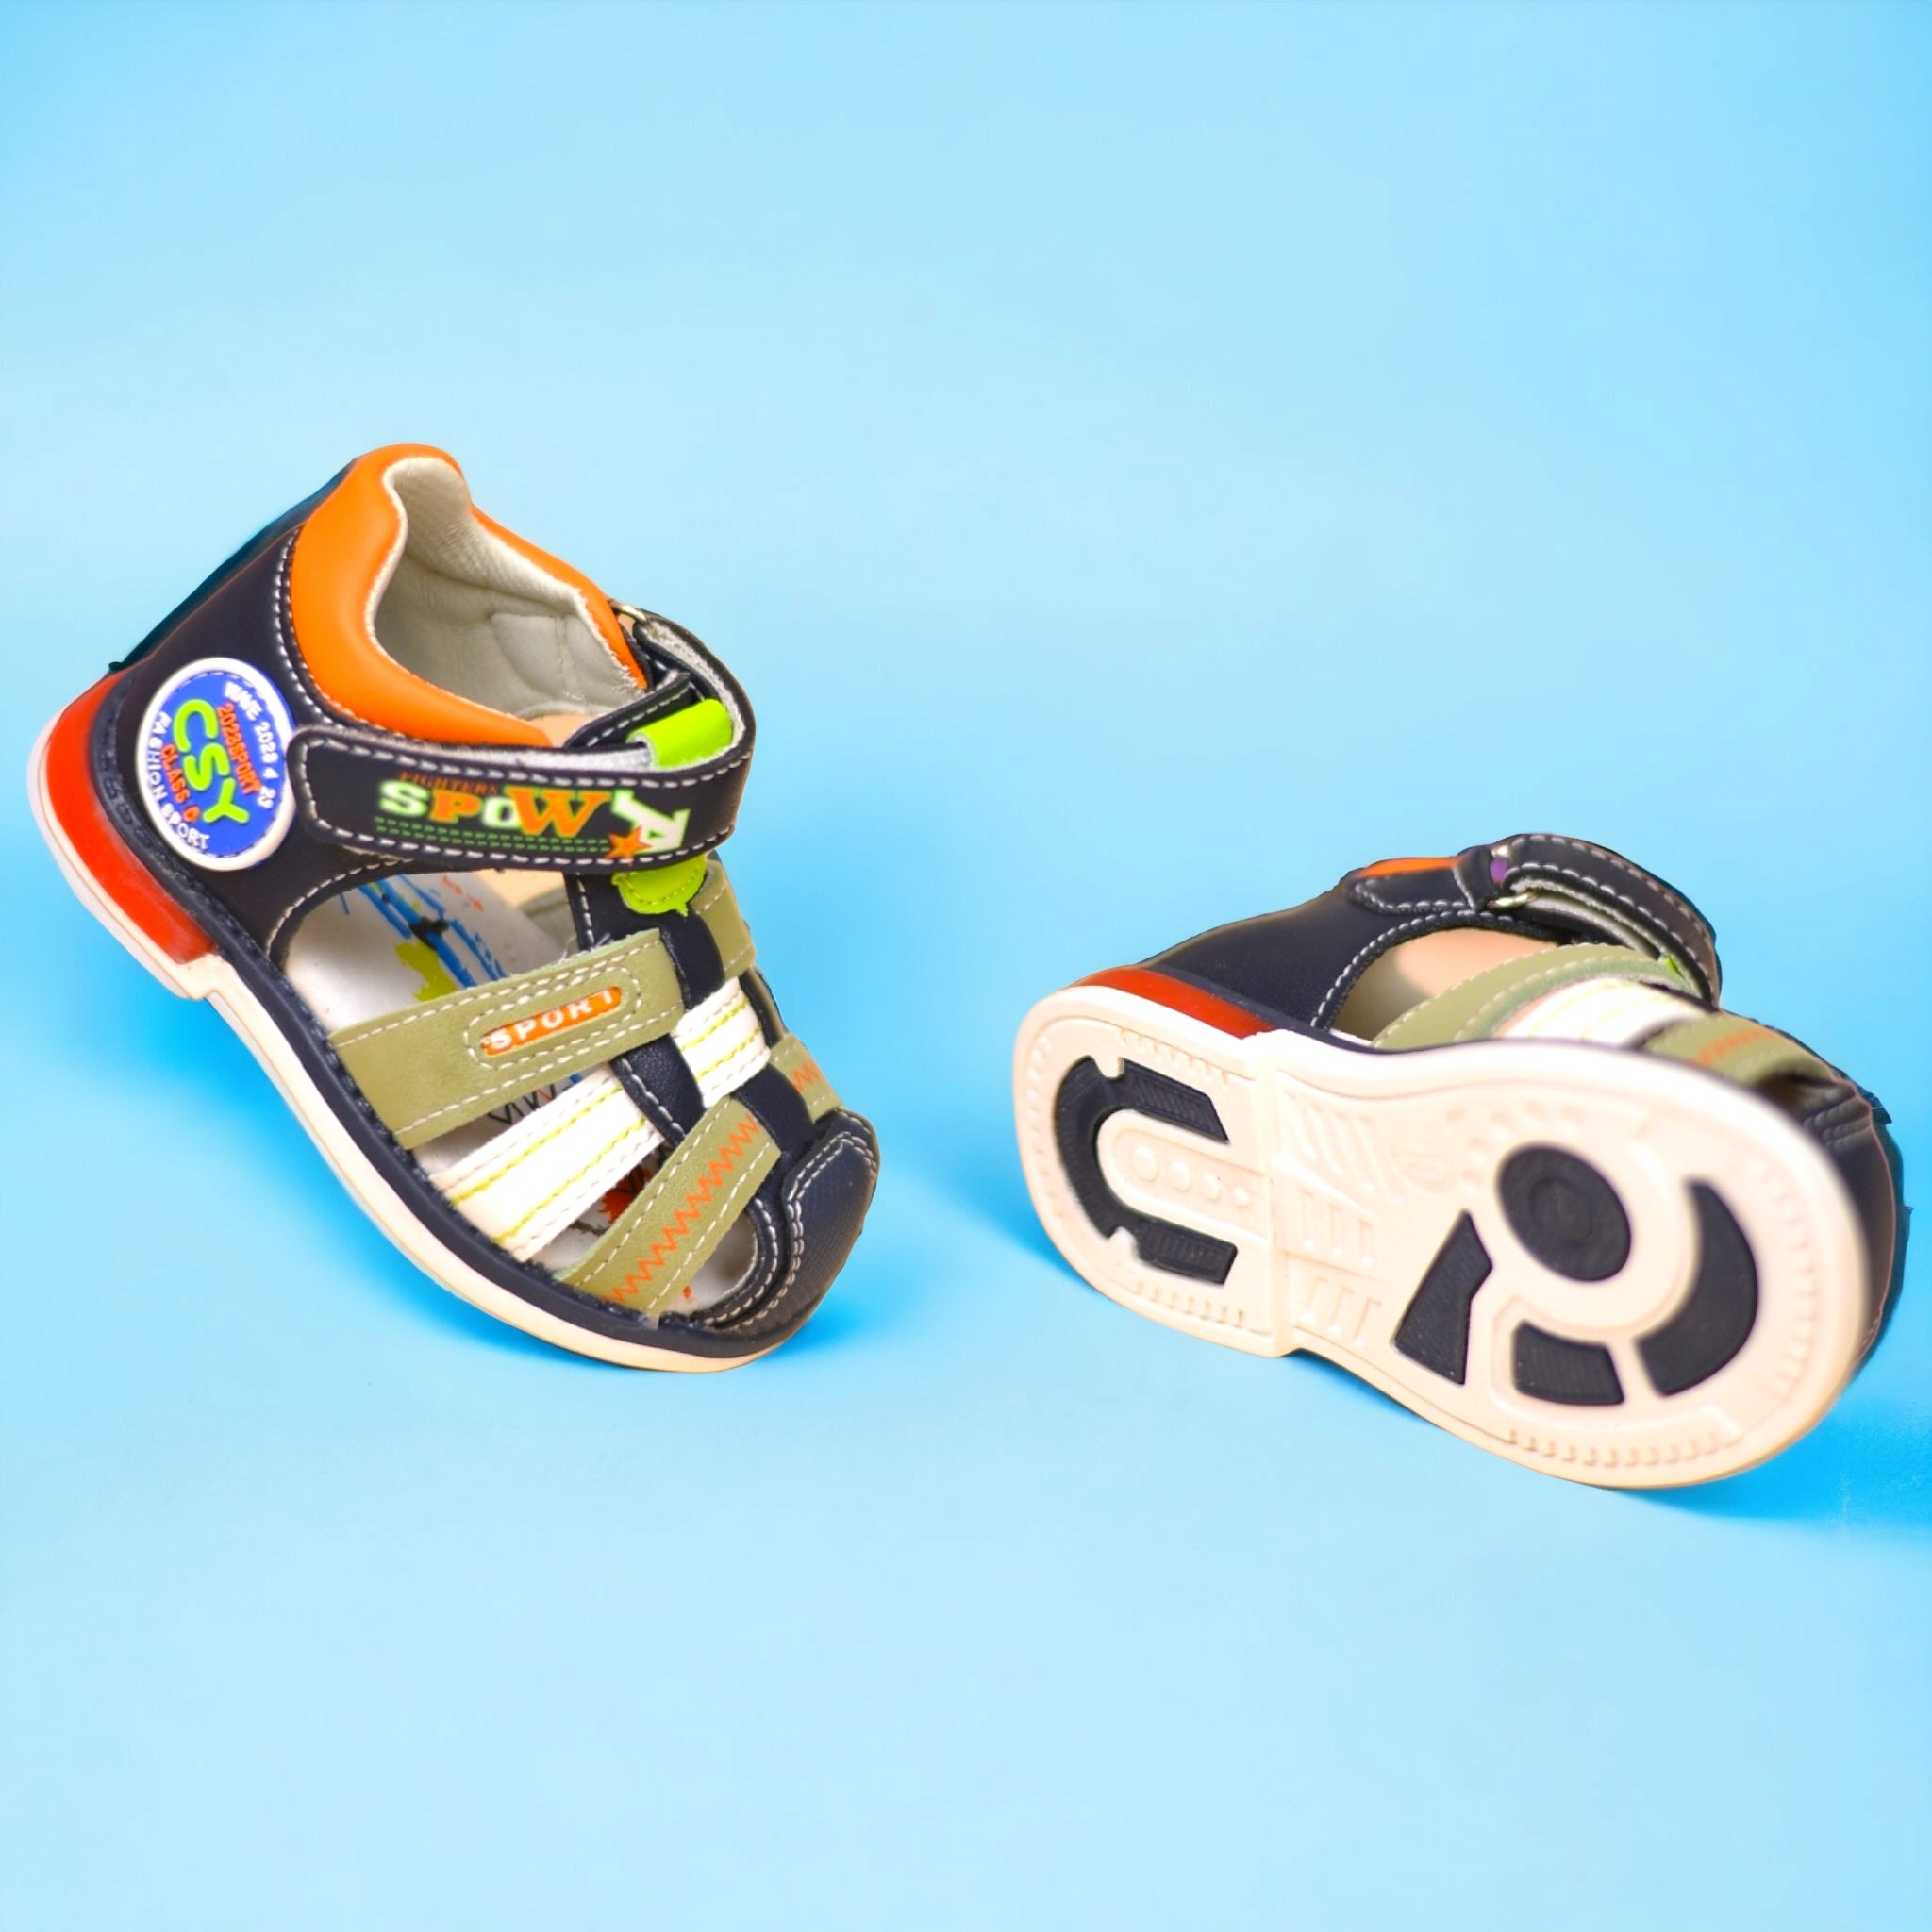 Kids Sandals Aqua Blue Made Of Eco Leather And Natural Leather